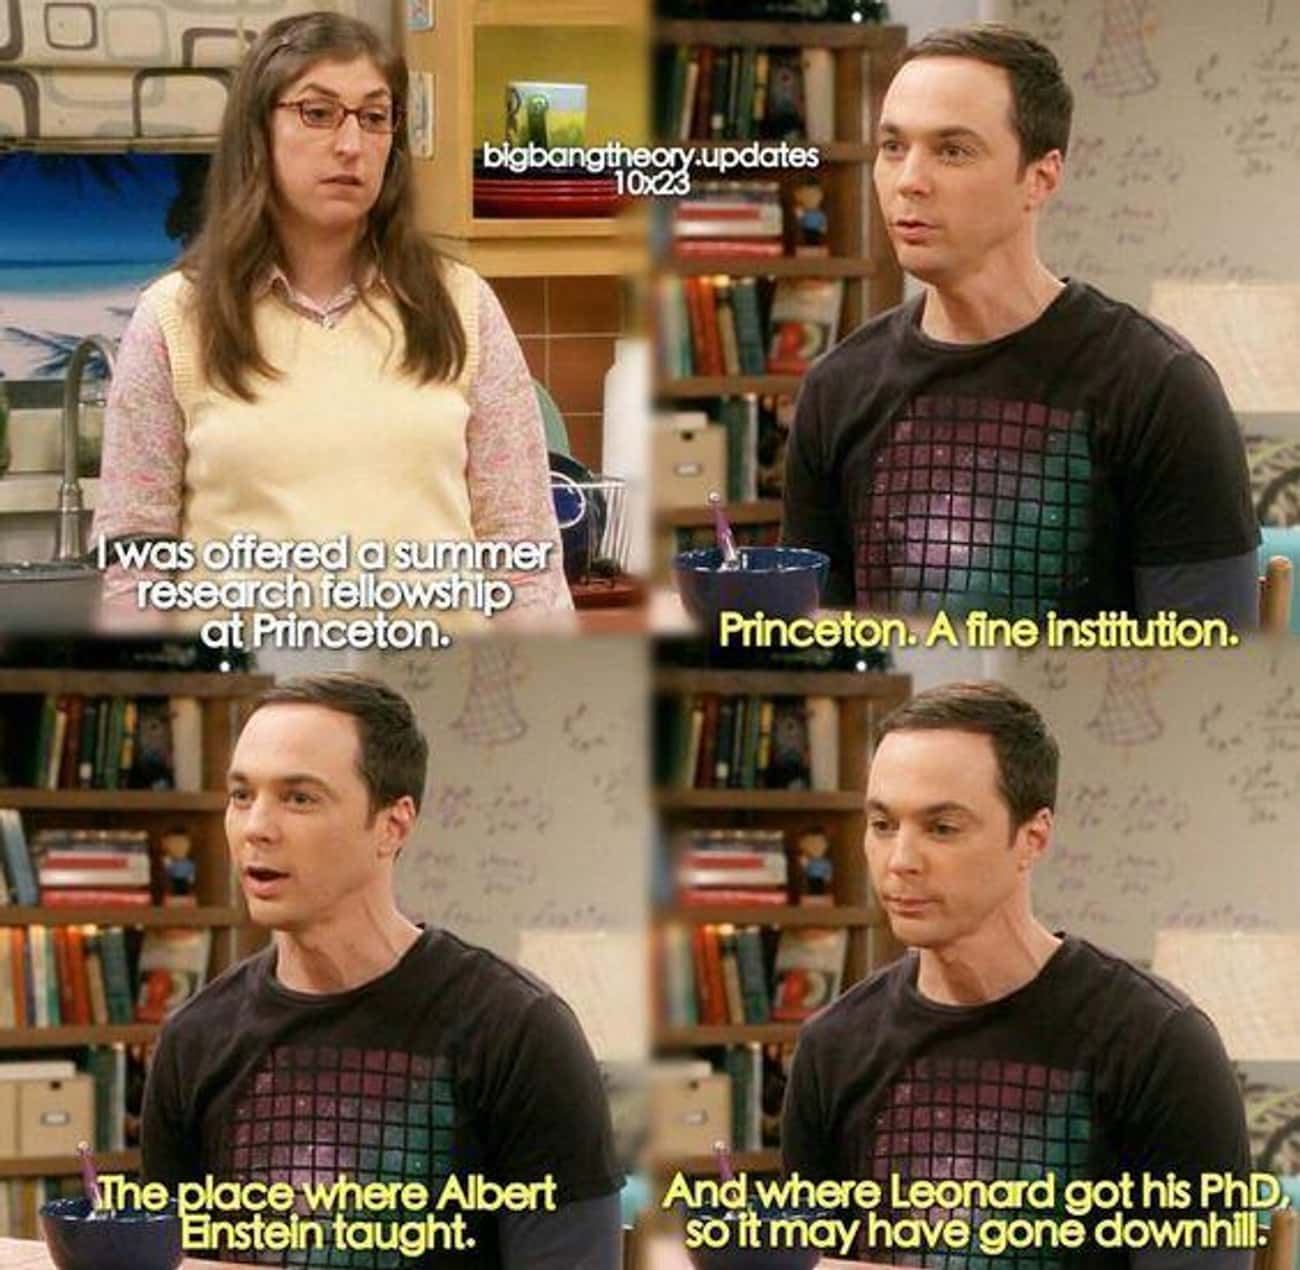 The Most Savage Sheldon Cooper Insults In 'The Big Bang Theory'